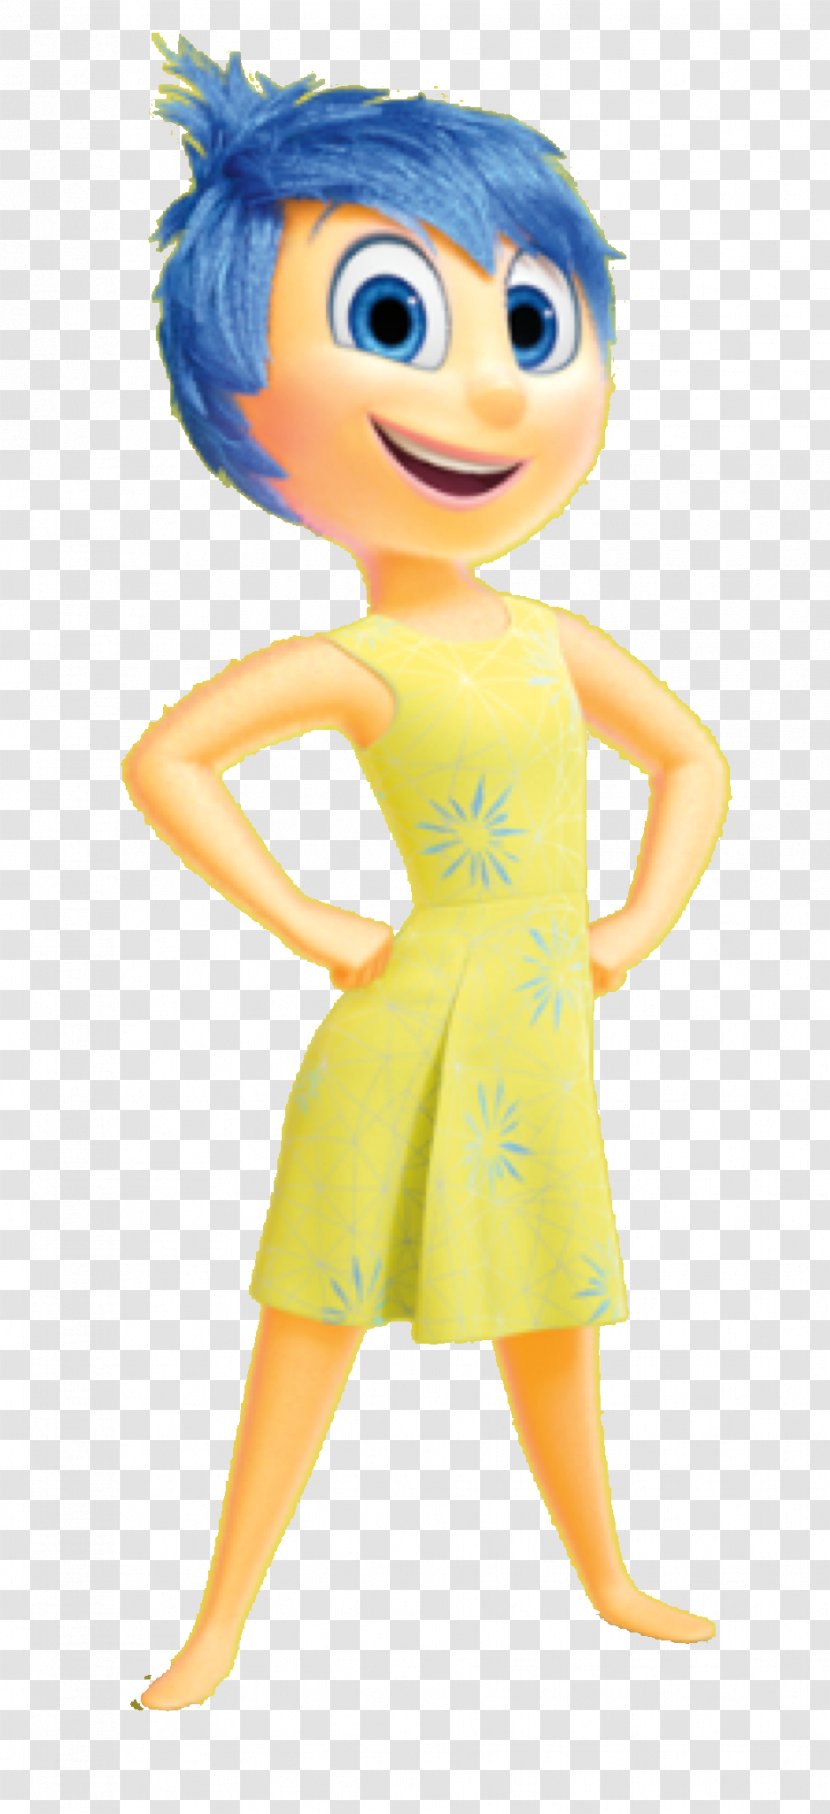 Pixar Sadness Happiness Film Image - Dress - Inside Out Disgust Riley Transparent PNG